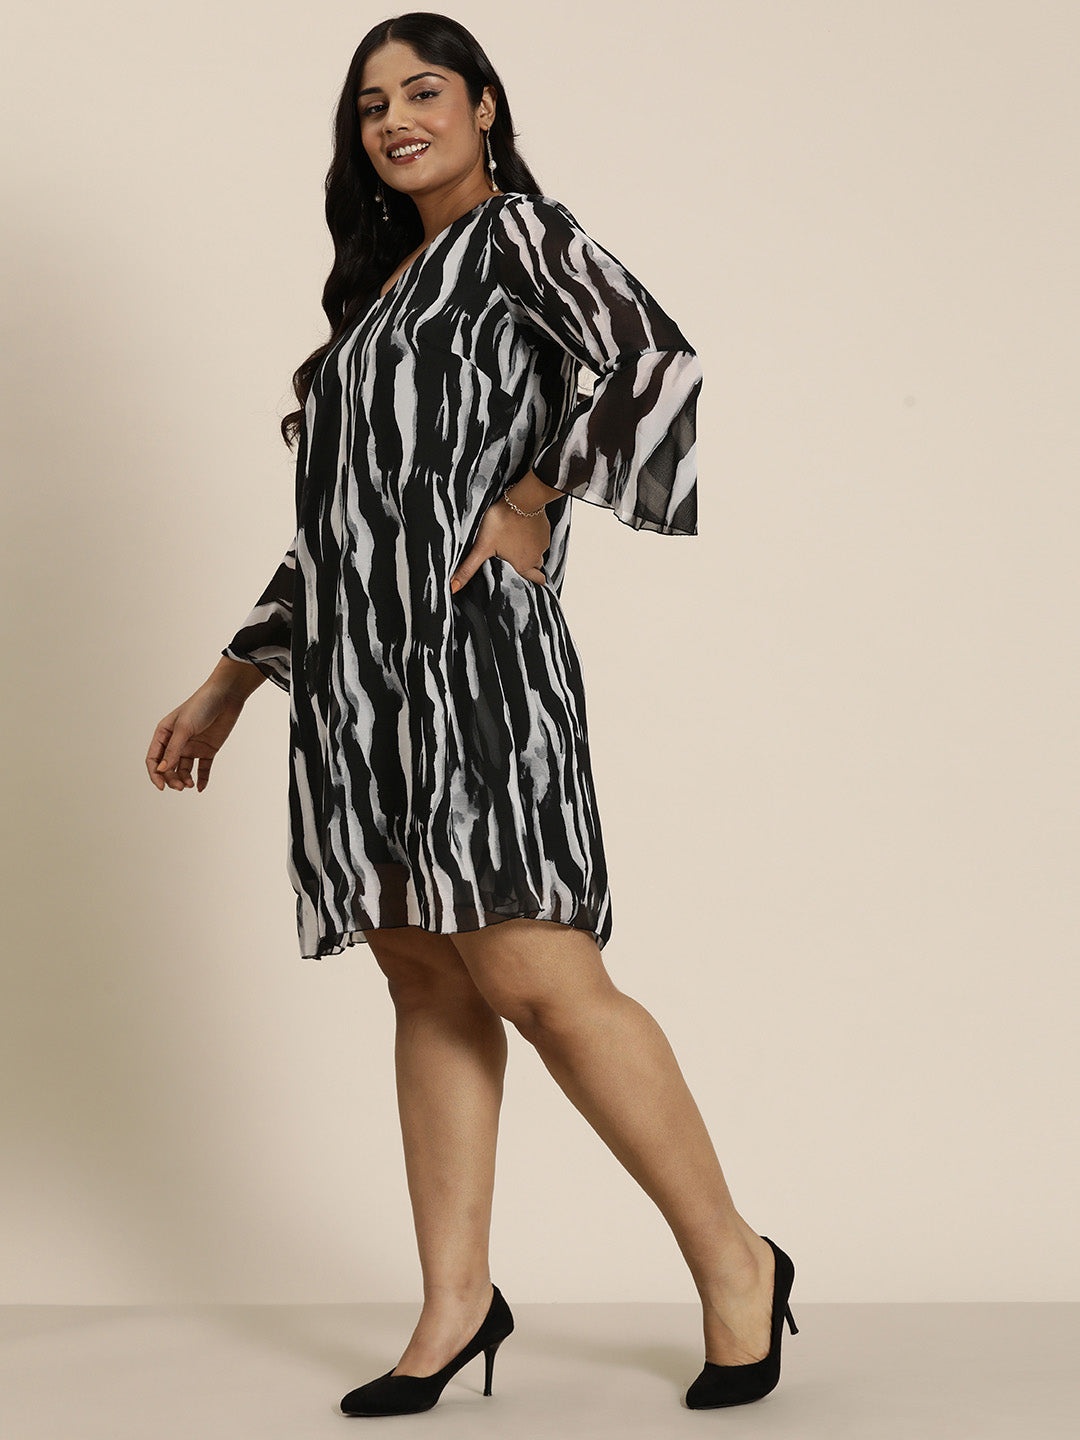 Abstract print A-line dress.